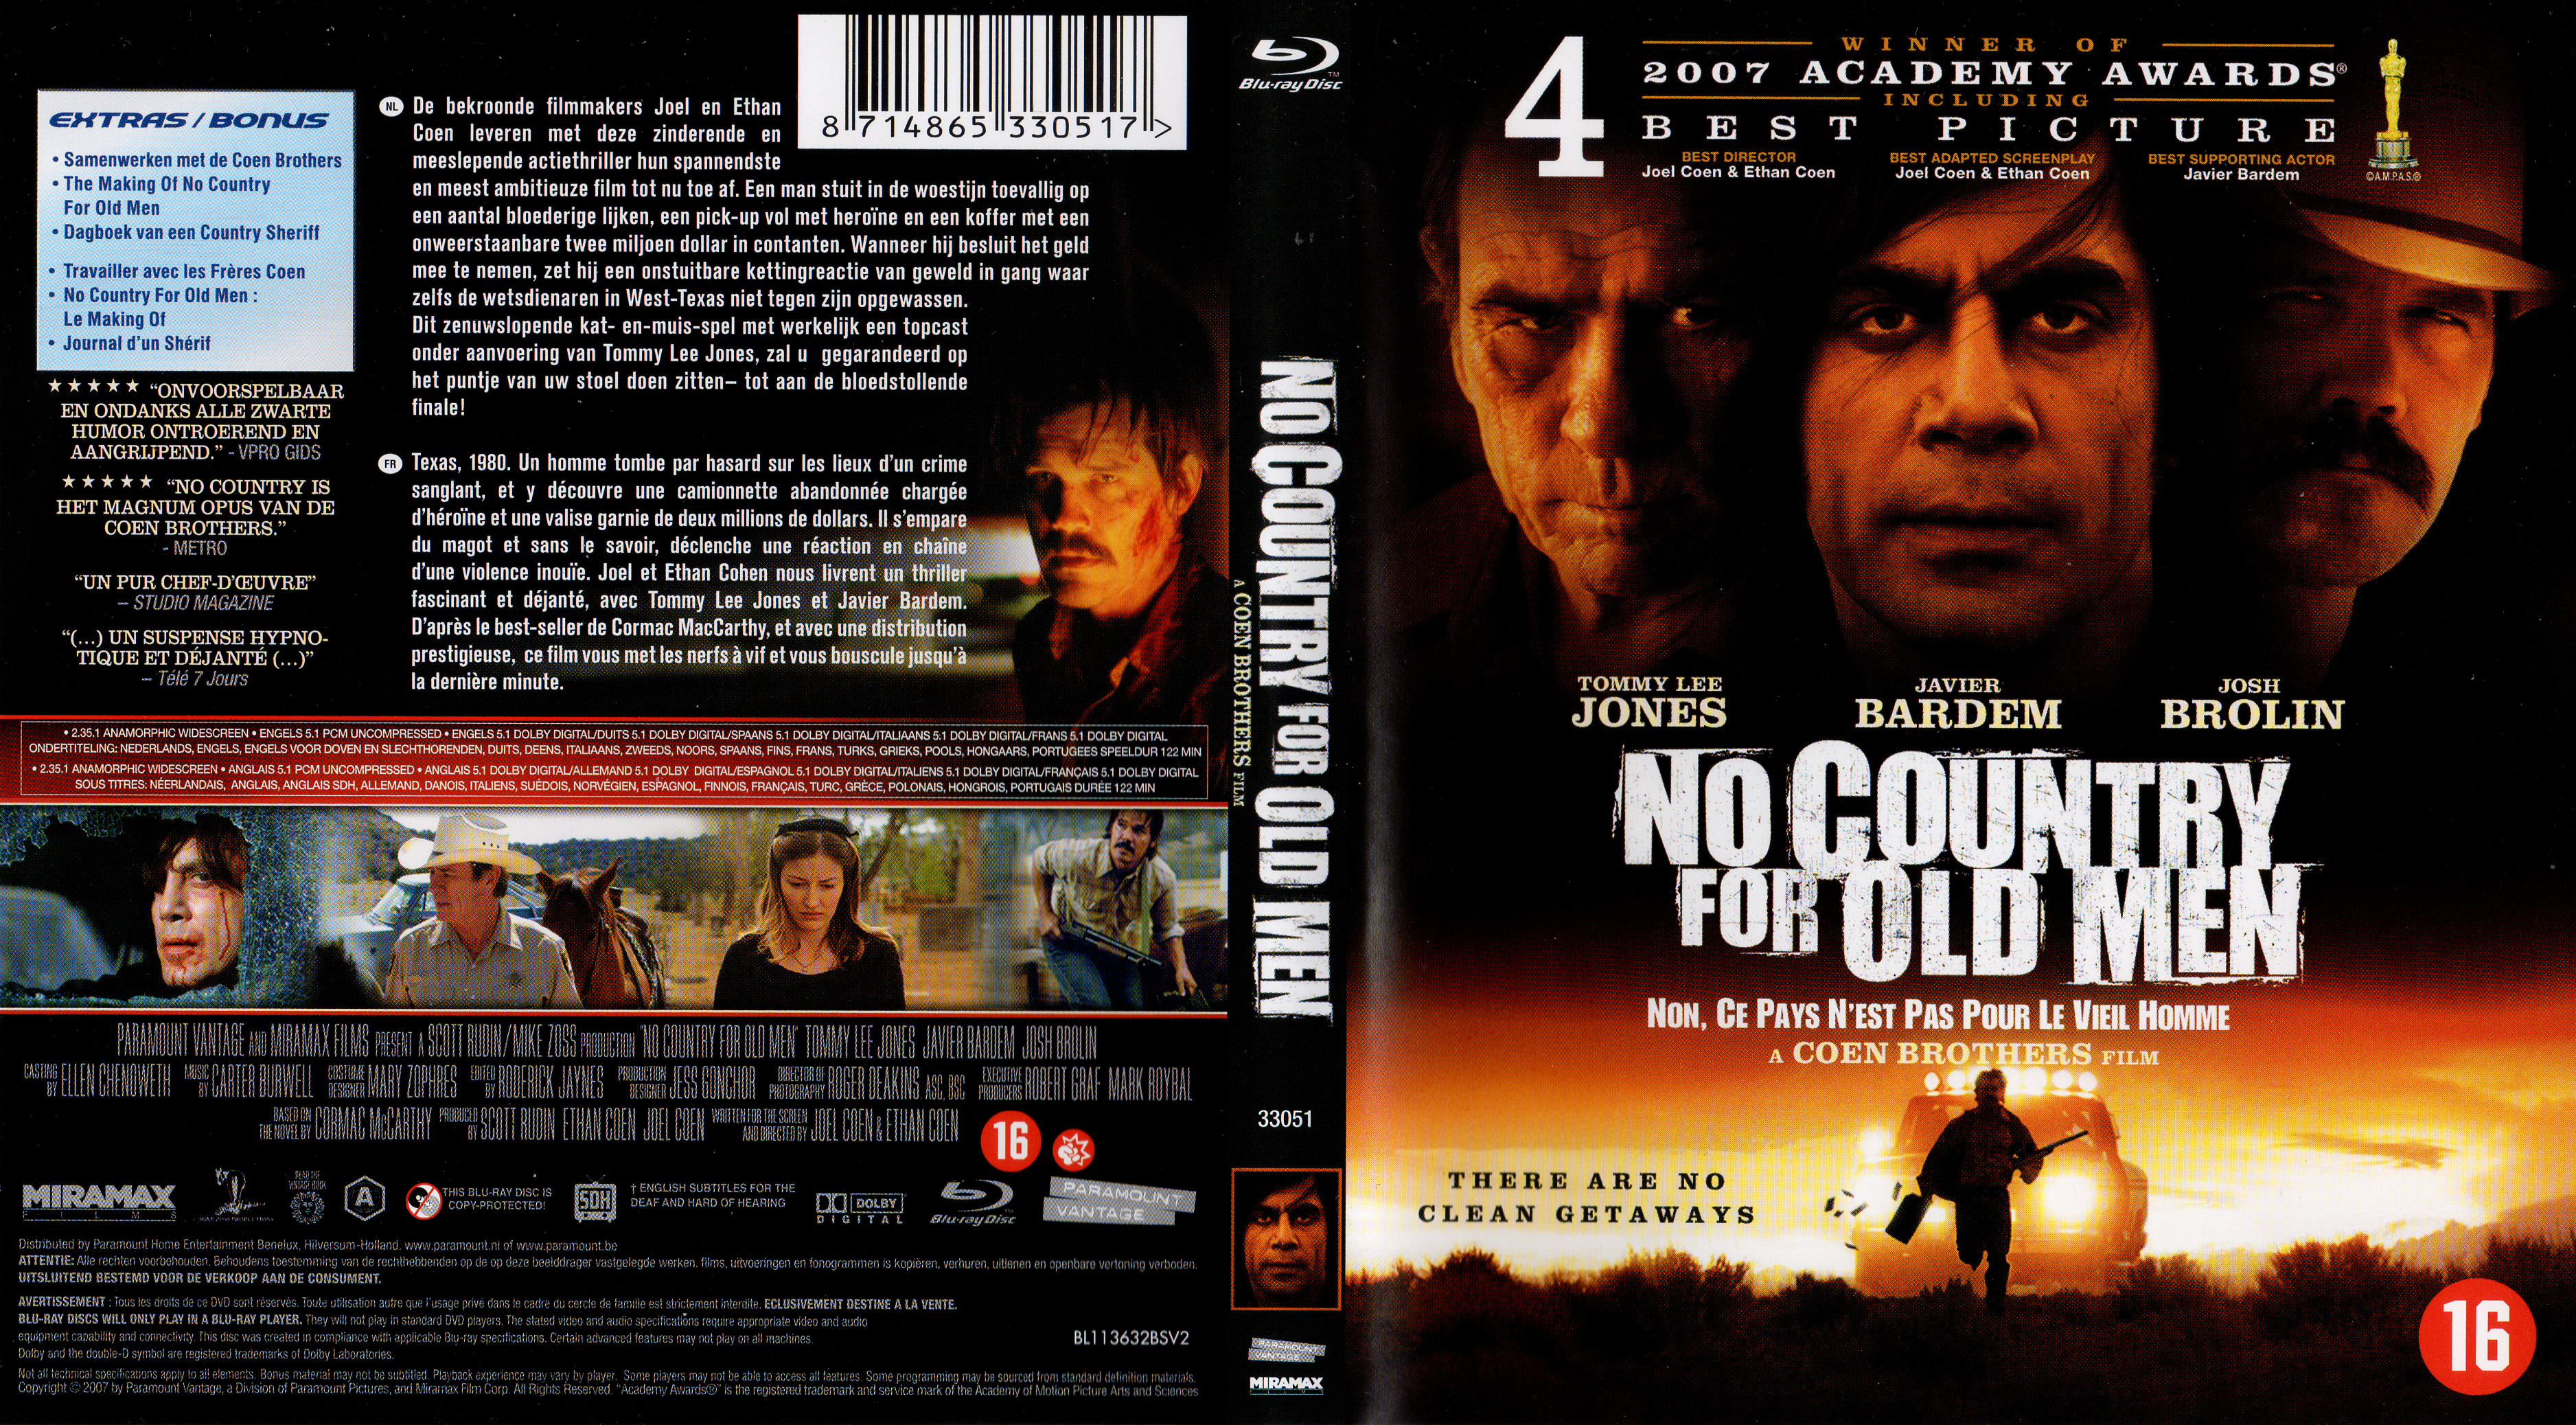 Jaquette DVD No country for old men (BLU-RAY) v2